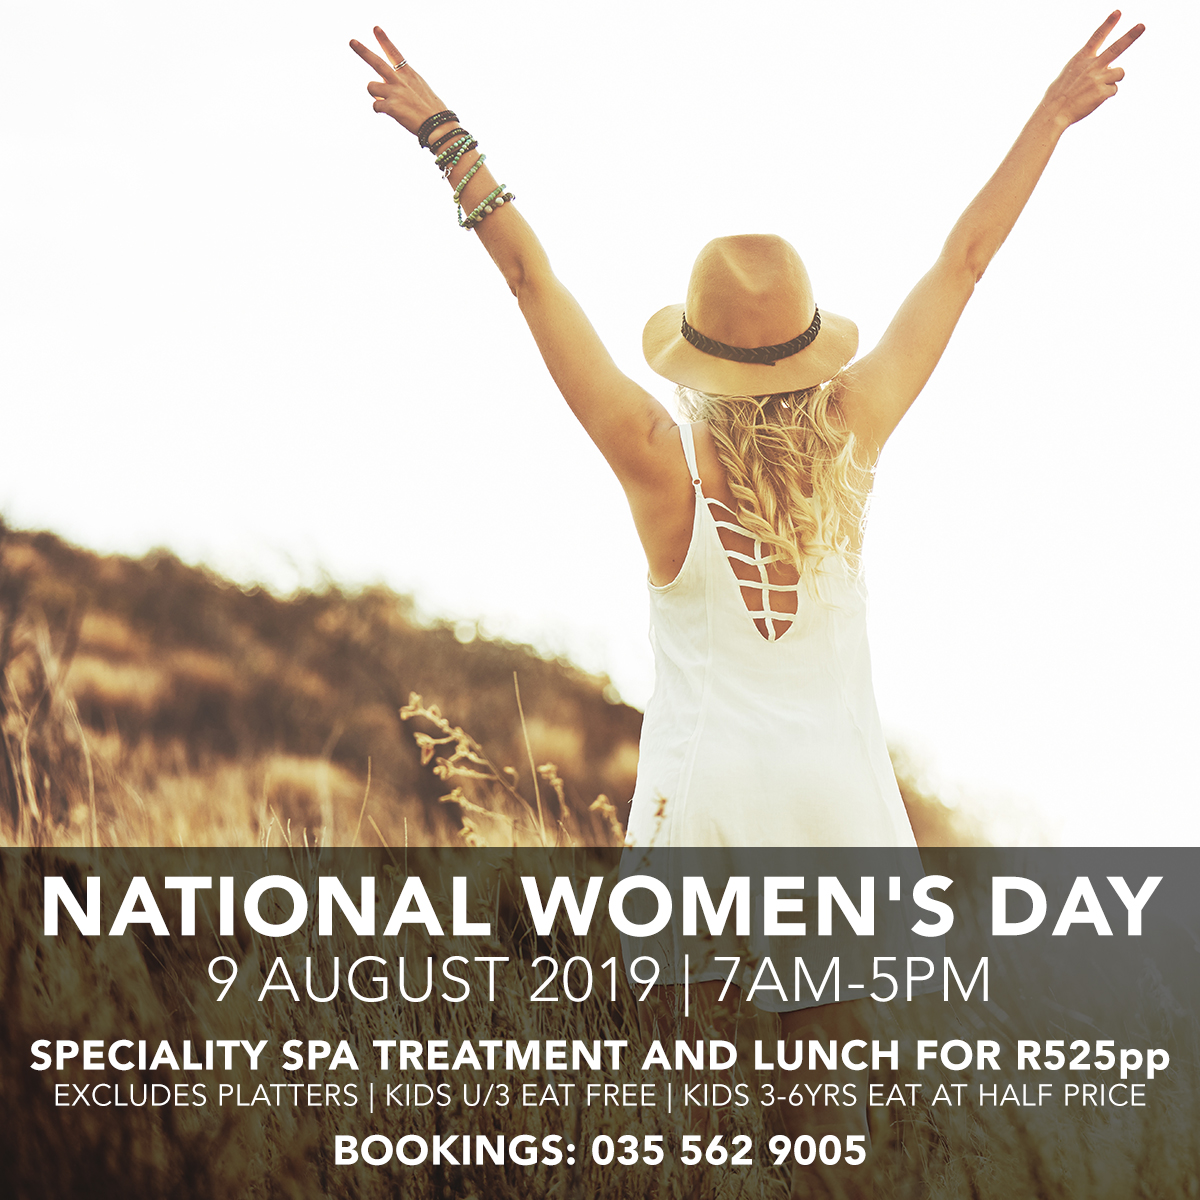 national women's day 9 Aug 2019 7am-5pm